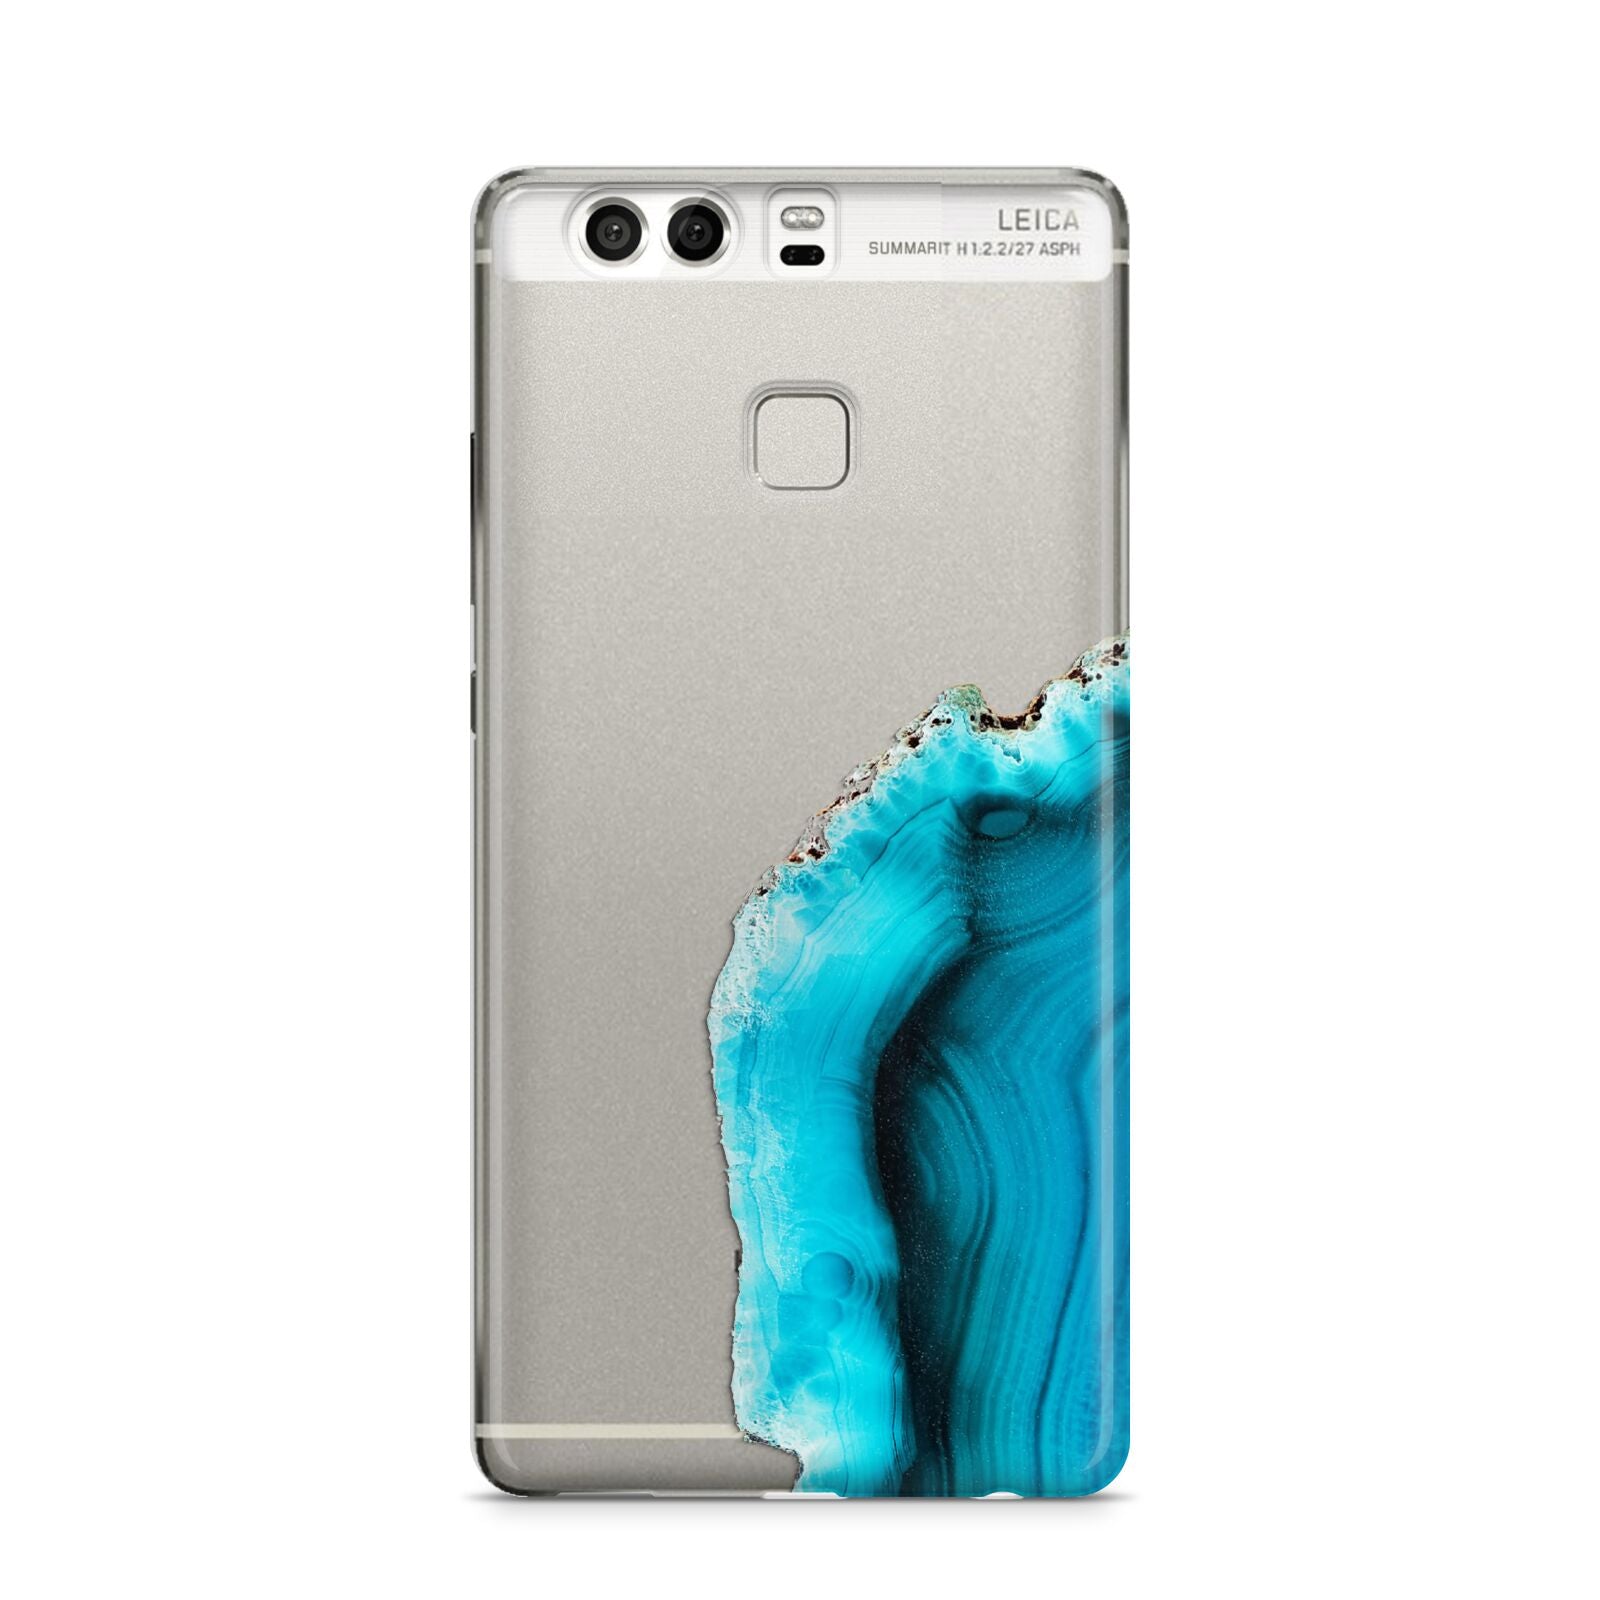 Agate Blue Turquoise Huawei P9 Case